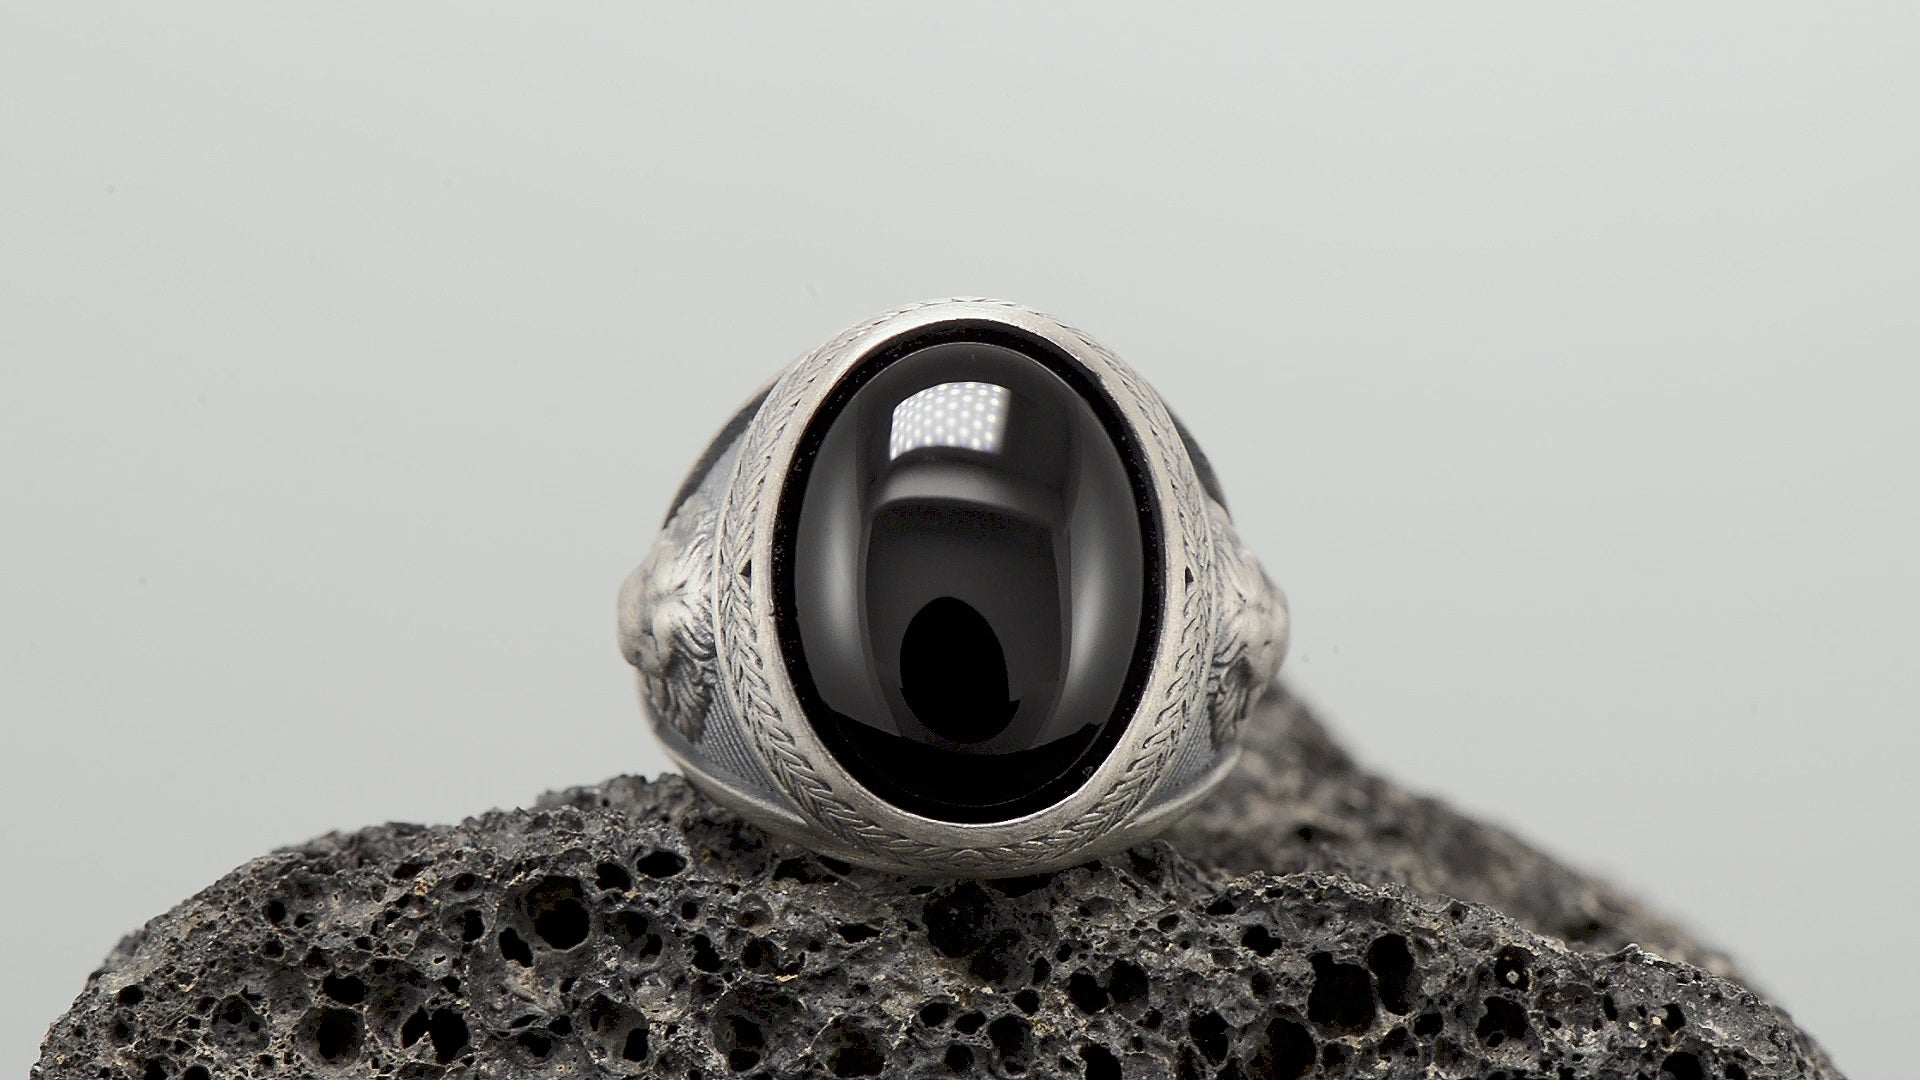 Lion Silver Men's Ring, Oval Onyx Lion Head Ring, Oxidized Animal 925 Sterling Silver Ring